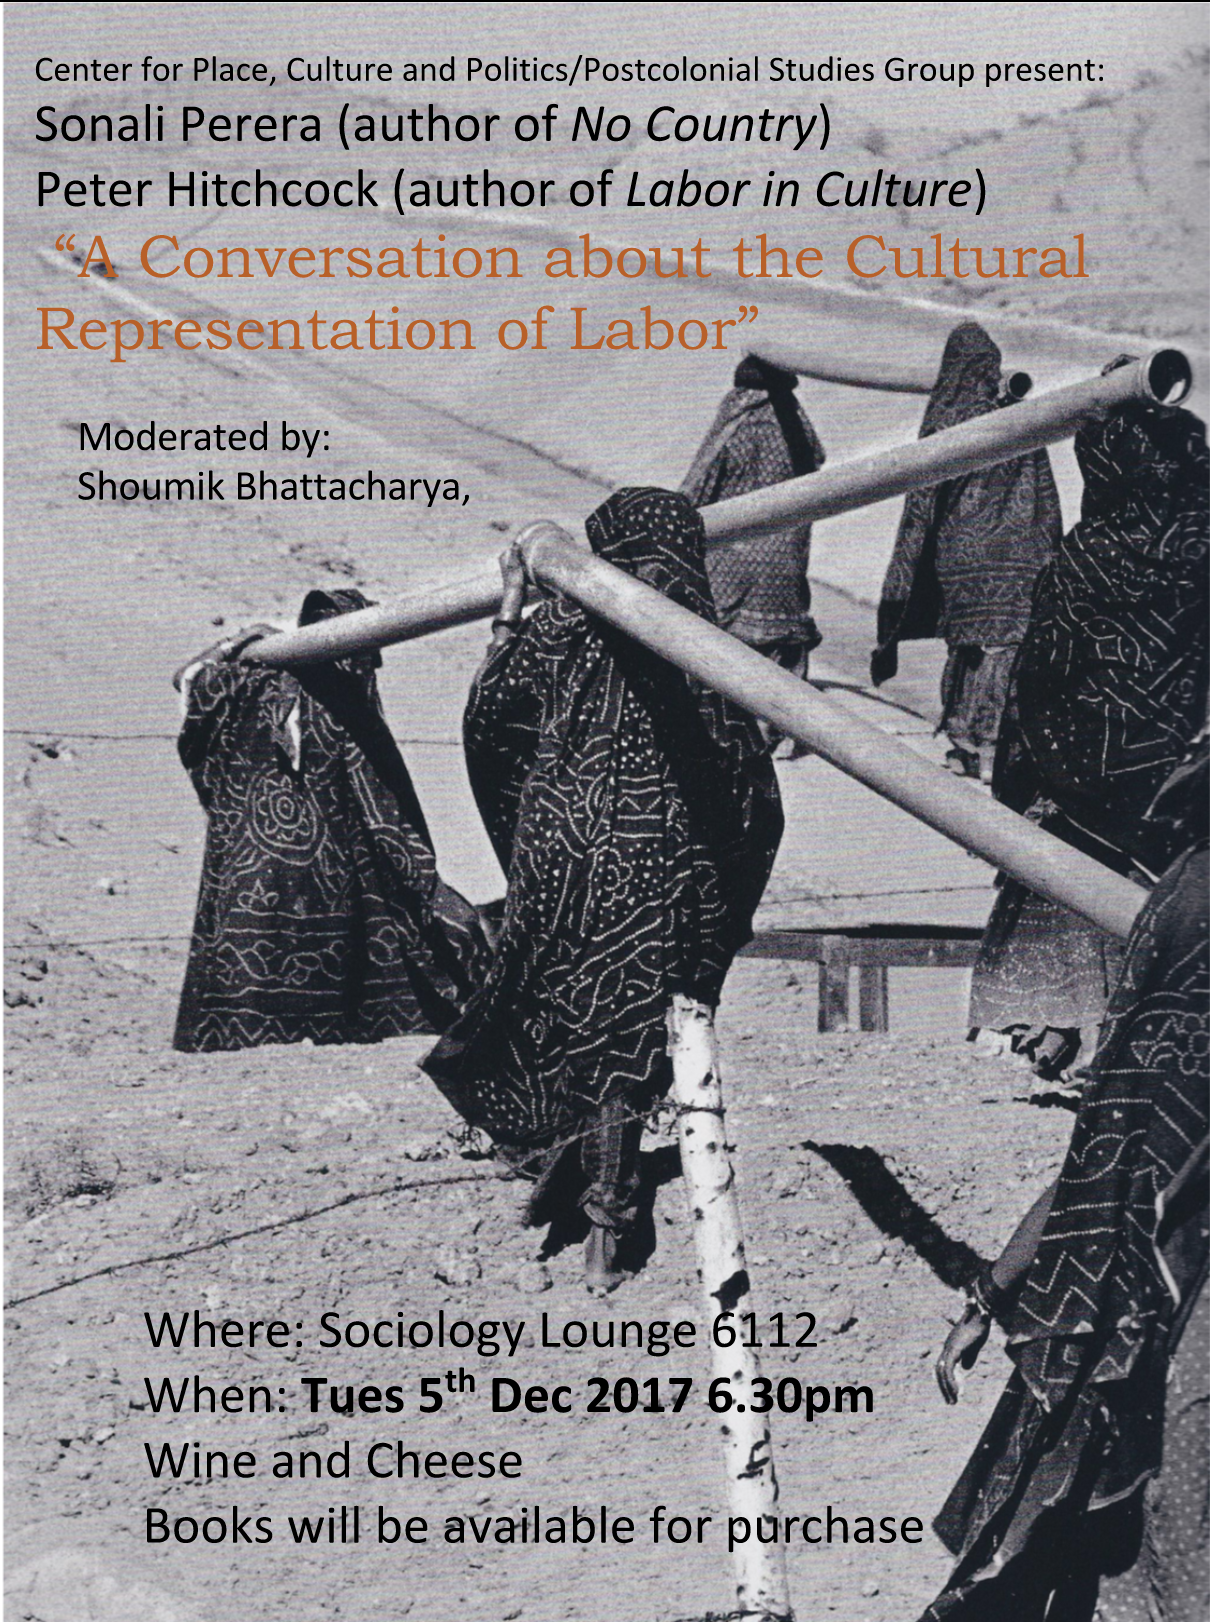 12/05:”A Conversation about the Cultural Representation of Labor” with Sonali Perera and Peter Hitchcock